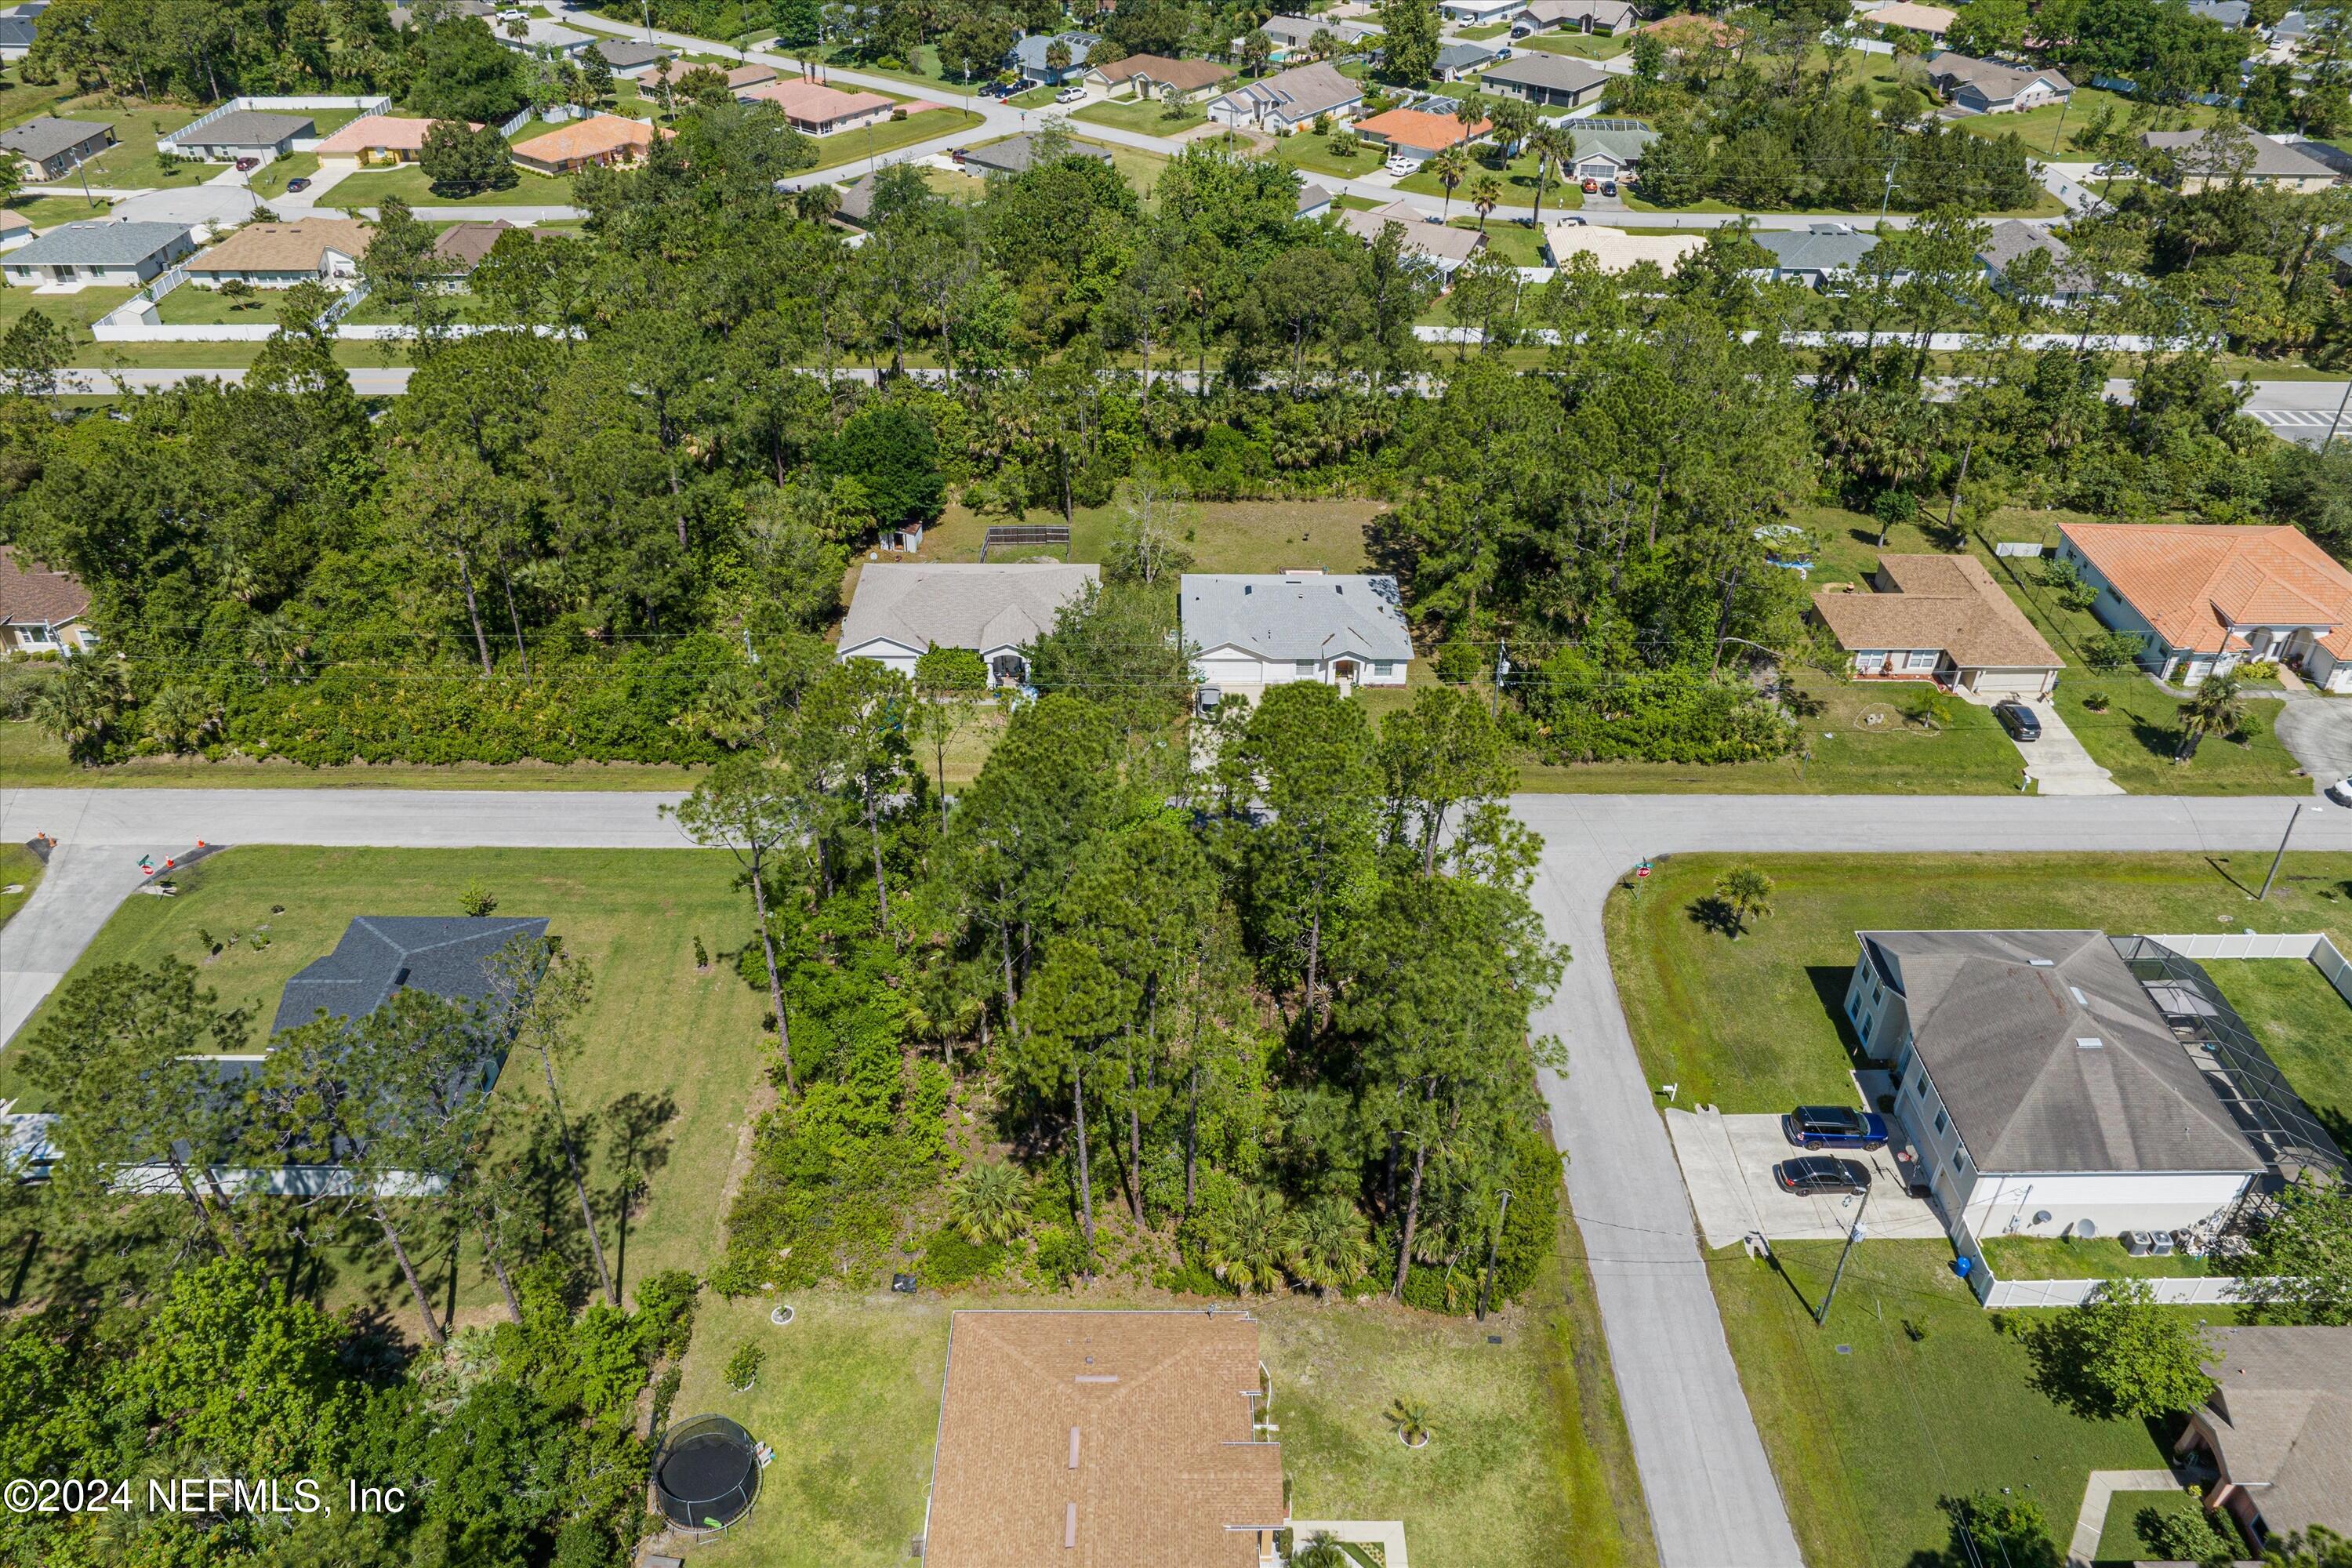 an aerial view of a residential houses with outdoor space and trees all around